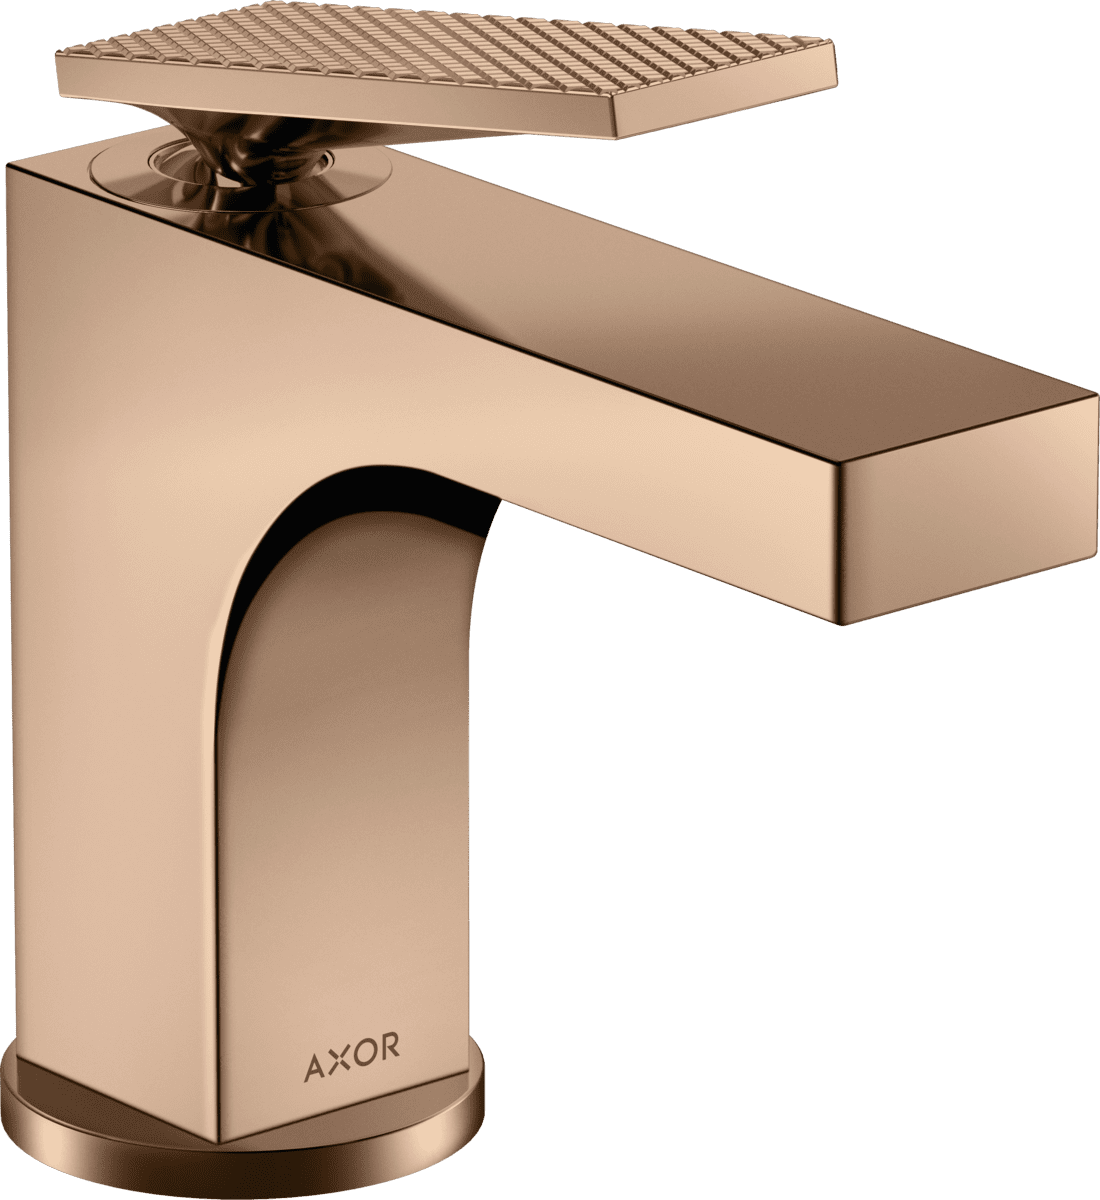 Picture of HANSGROHE AXOR Citterio Single lever basin mixer 90 with lever handle for hand wash basins with pop-up waste set - rhombic cut #39001300 - Polished Red Gold